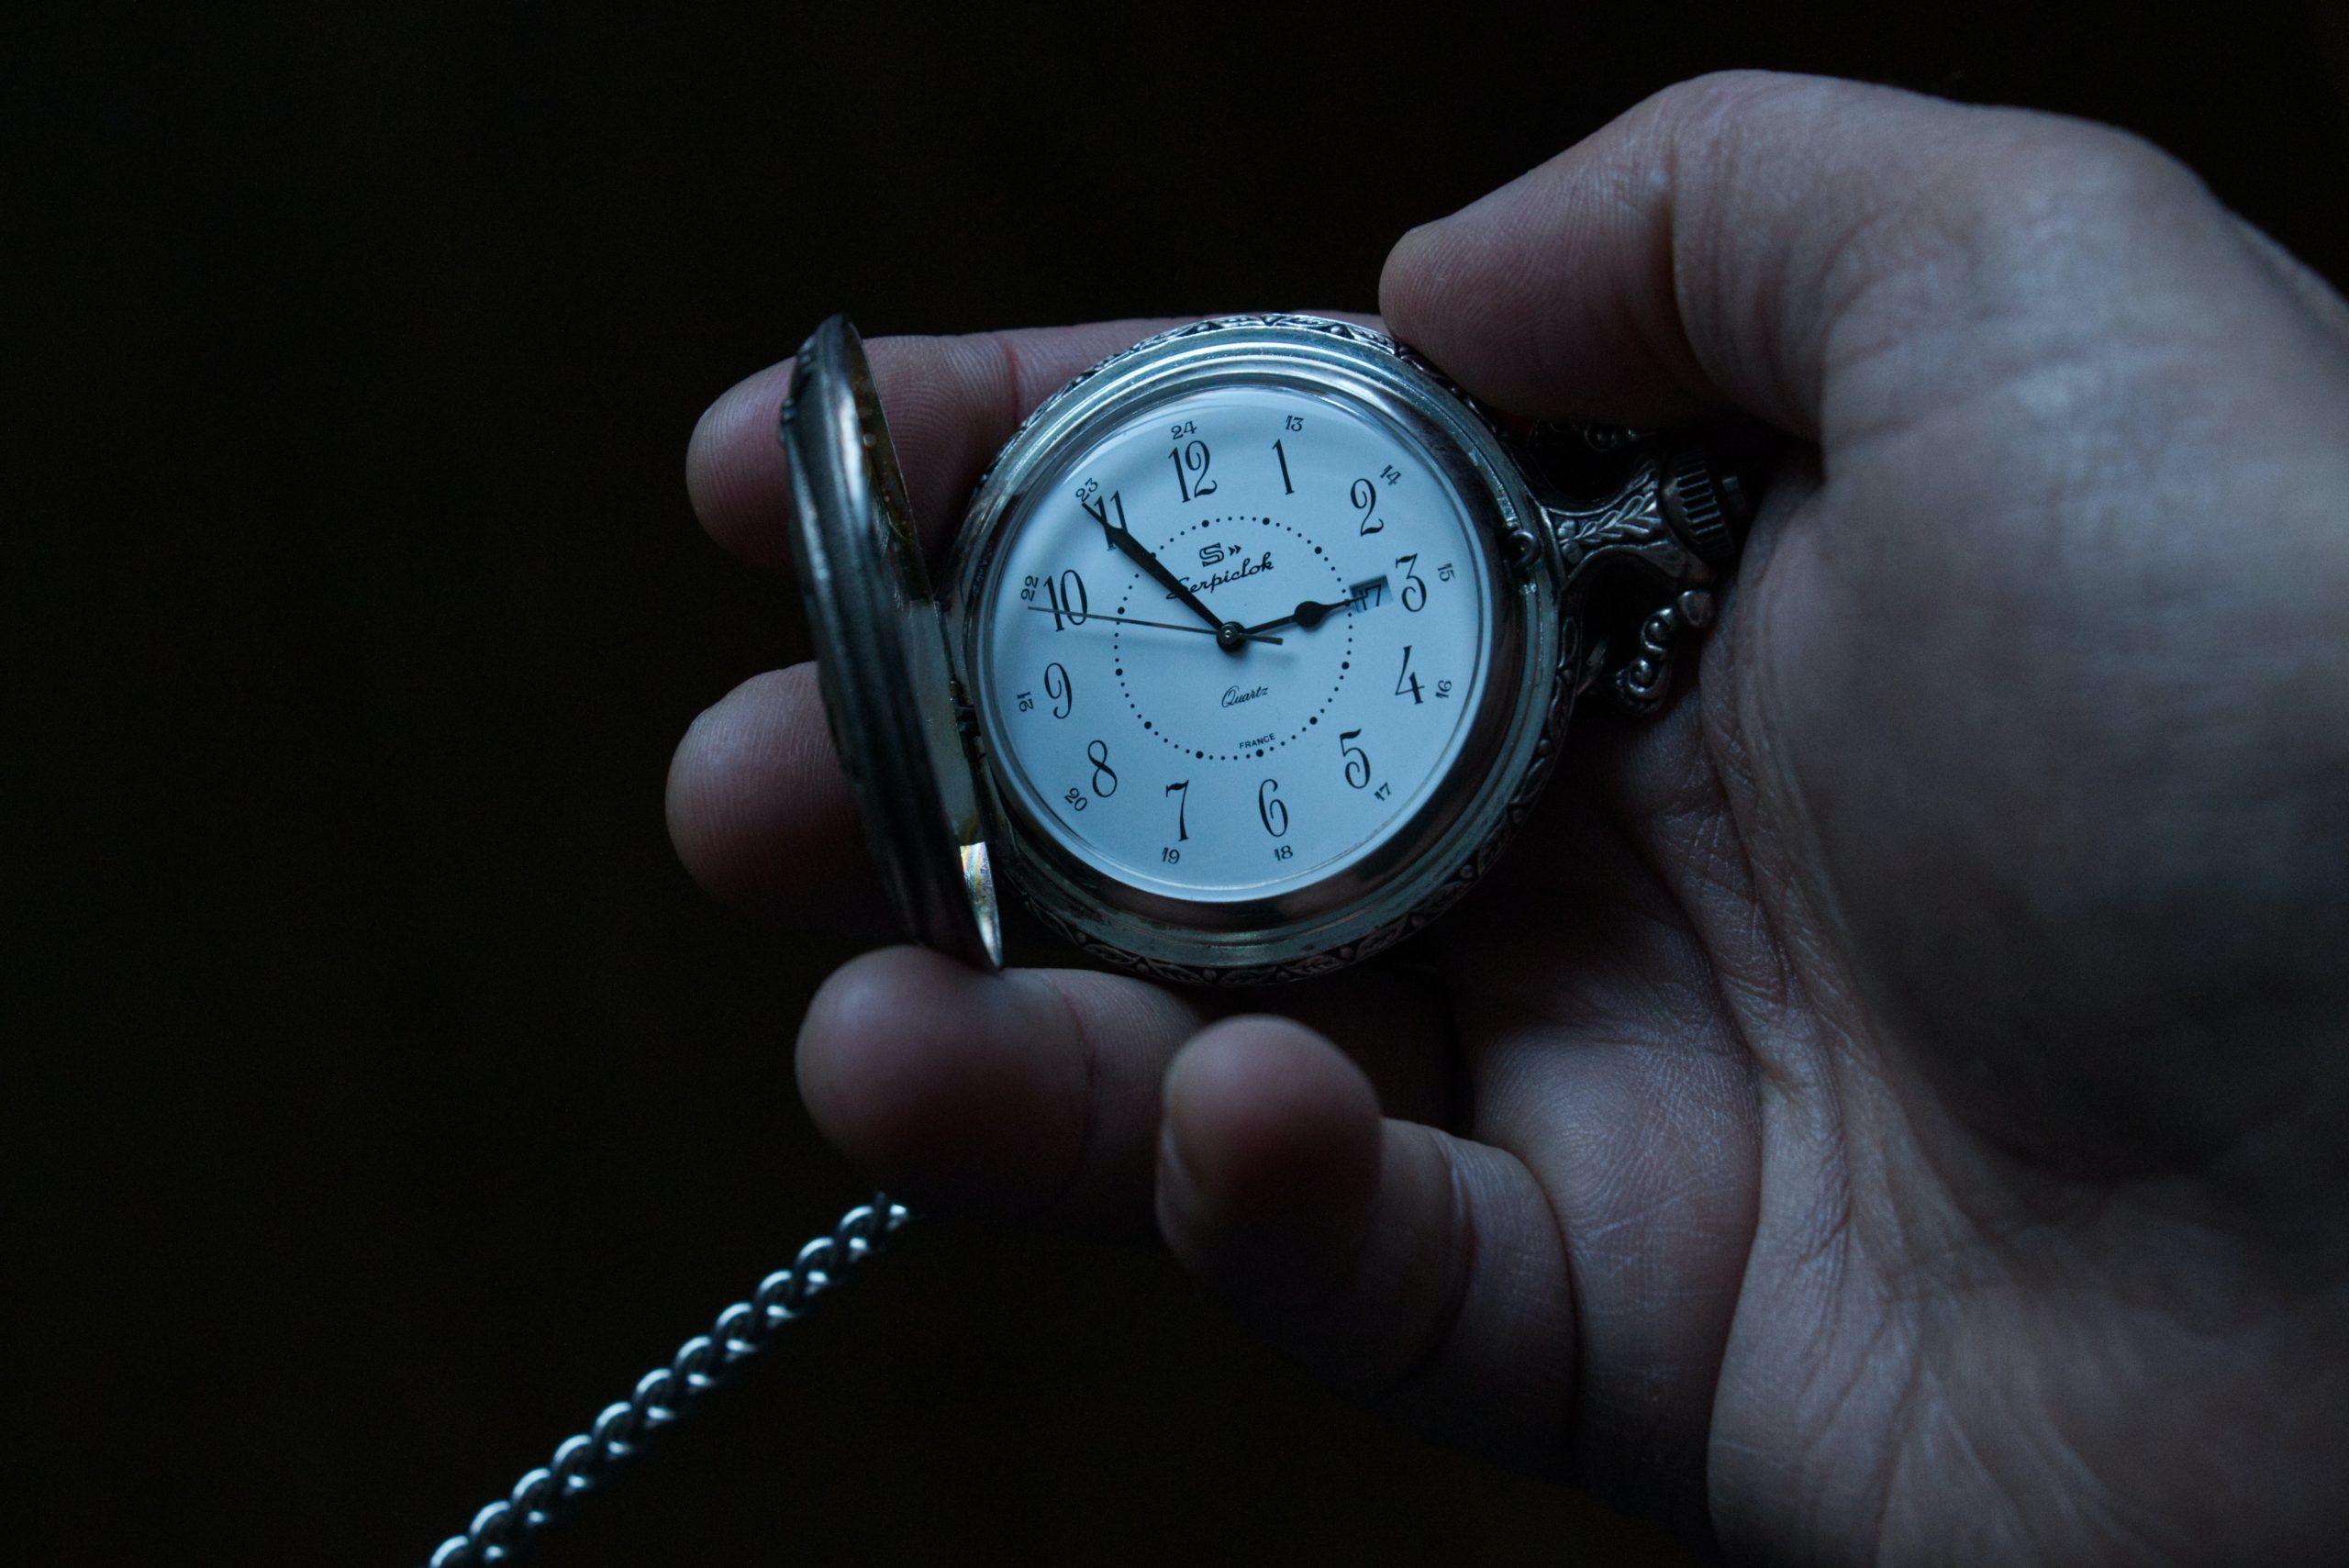 Pocket watch being held open in a white man's hand.